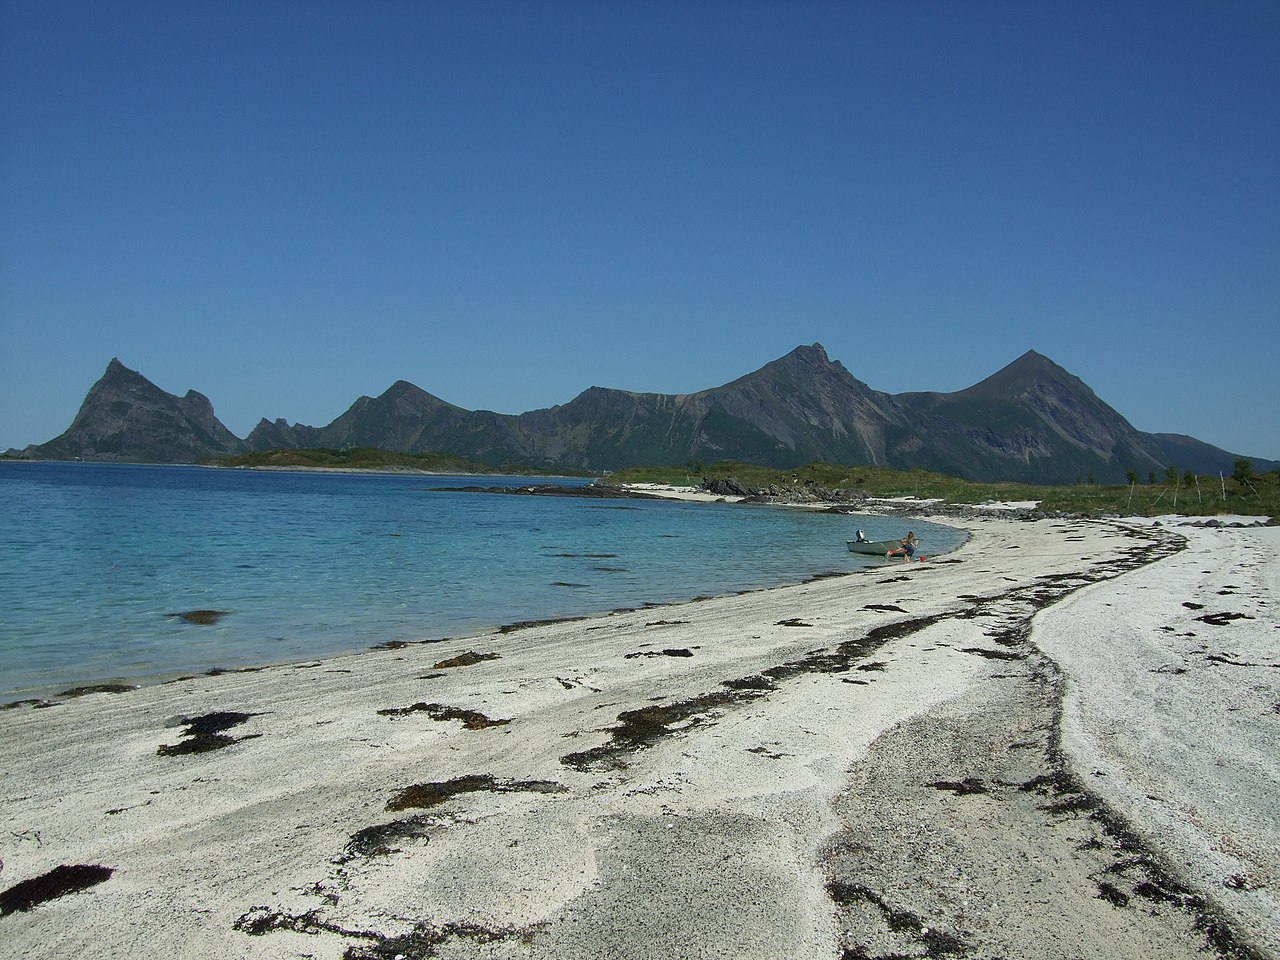 A beach at Engeløya with the mountain "Profile of Napeleon" in the background